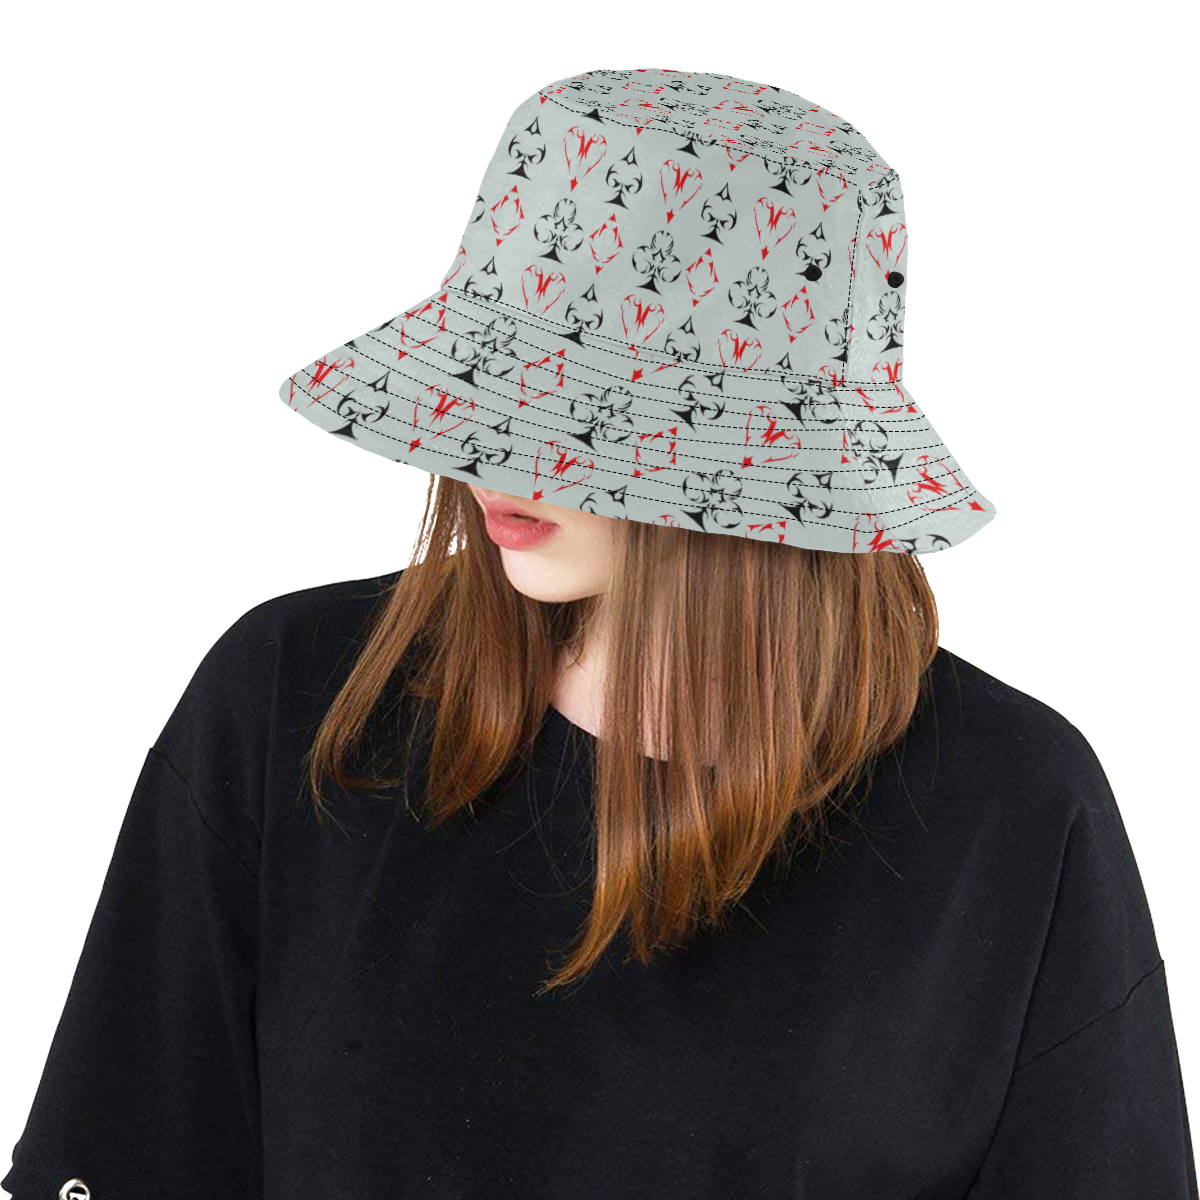 The four suits in playing cards All Over Print Bucket Hat